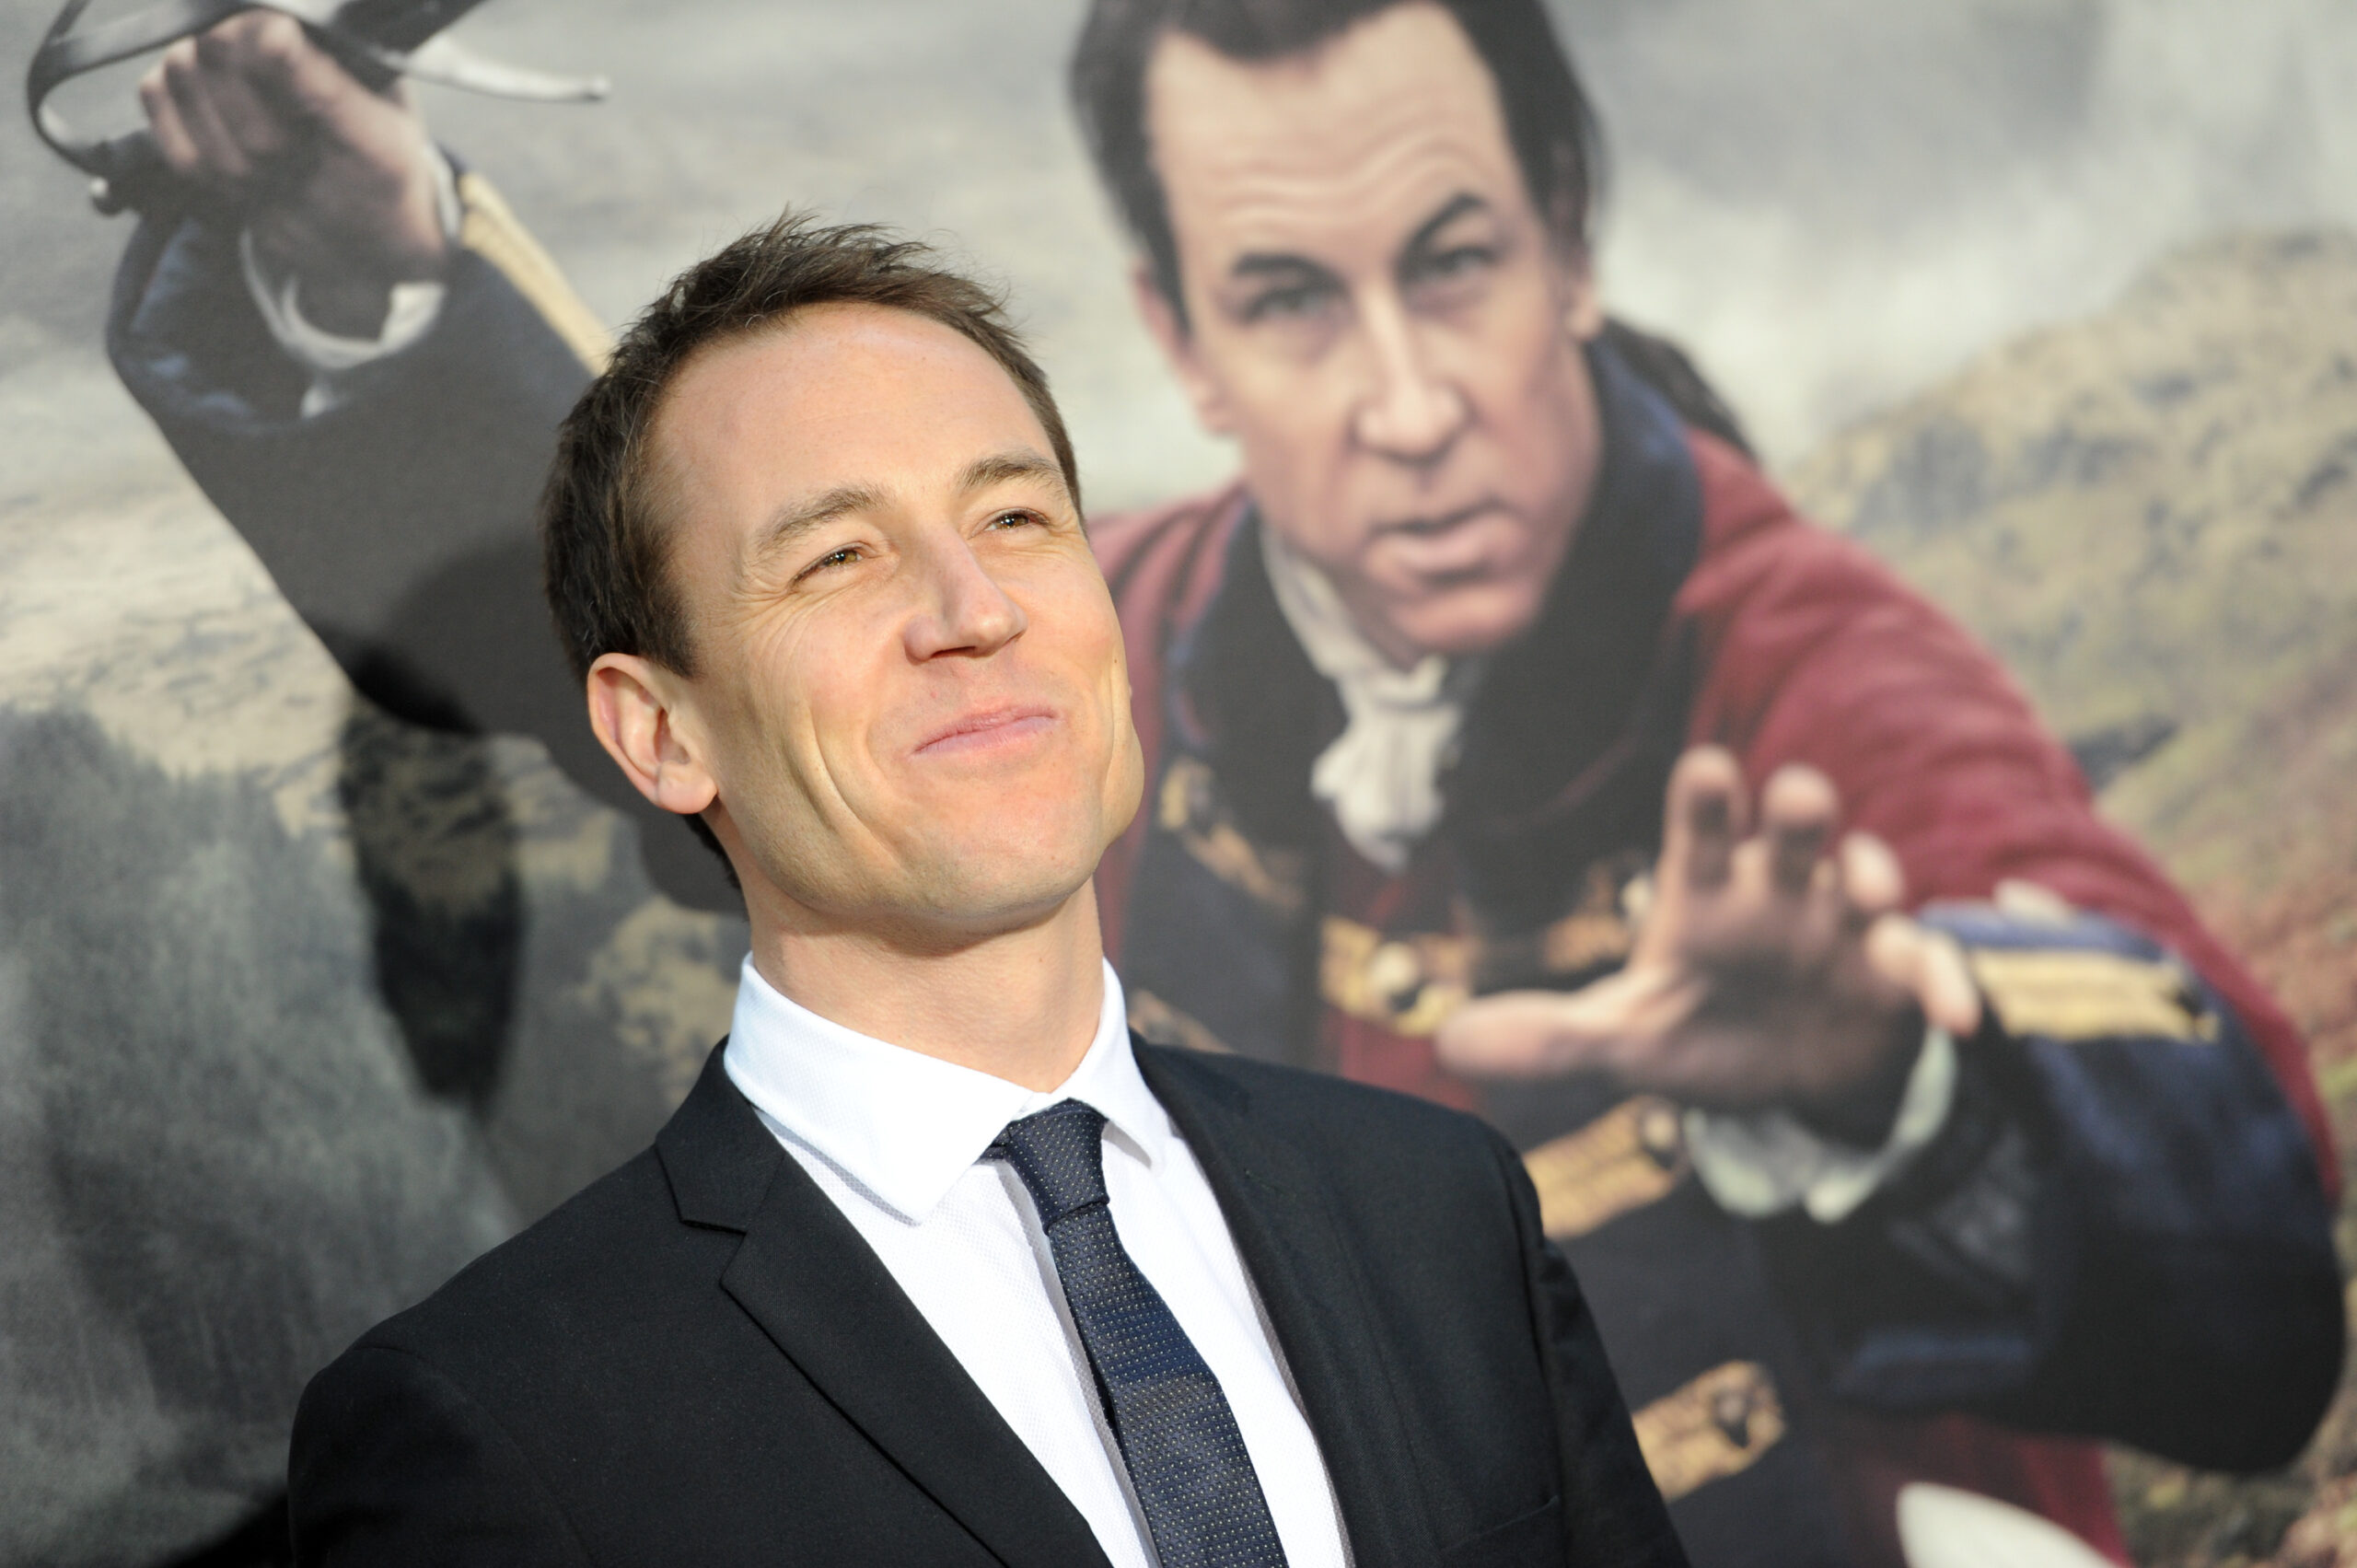 Actor Tobias Menzies attends the STARZ mid-season premiere of "Outlander" at the Ziegfeld Theatre on Wednesday, April 1, 2015, in New York.Photo: Evan Agostini/Invision/AP